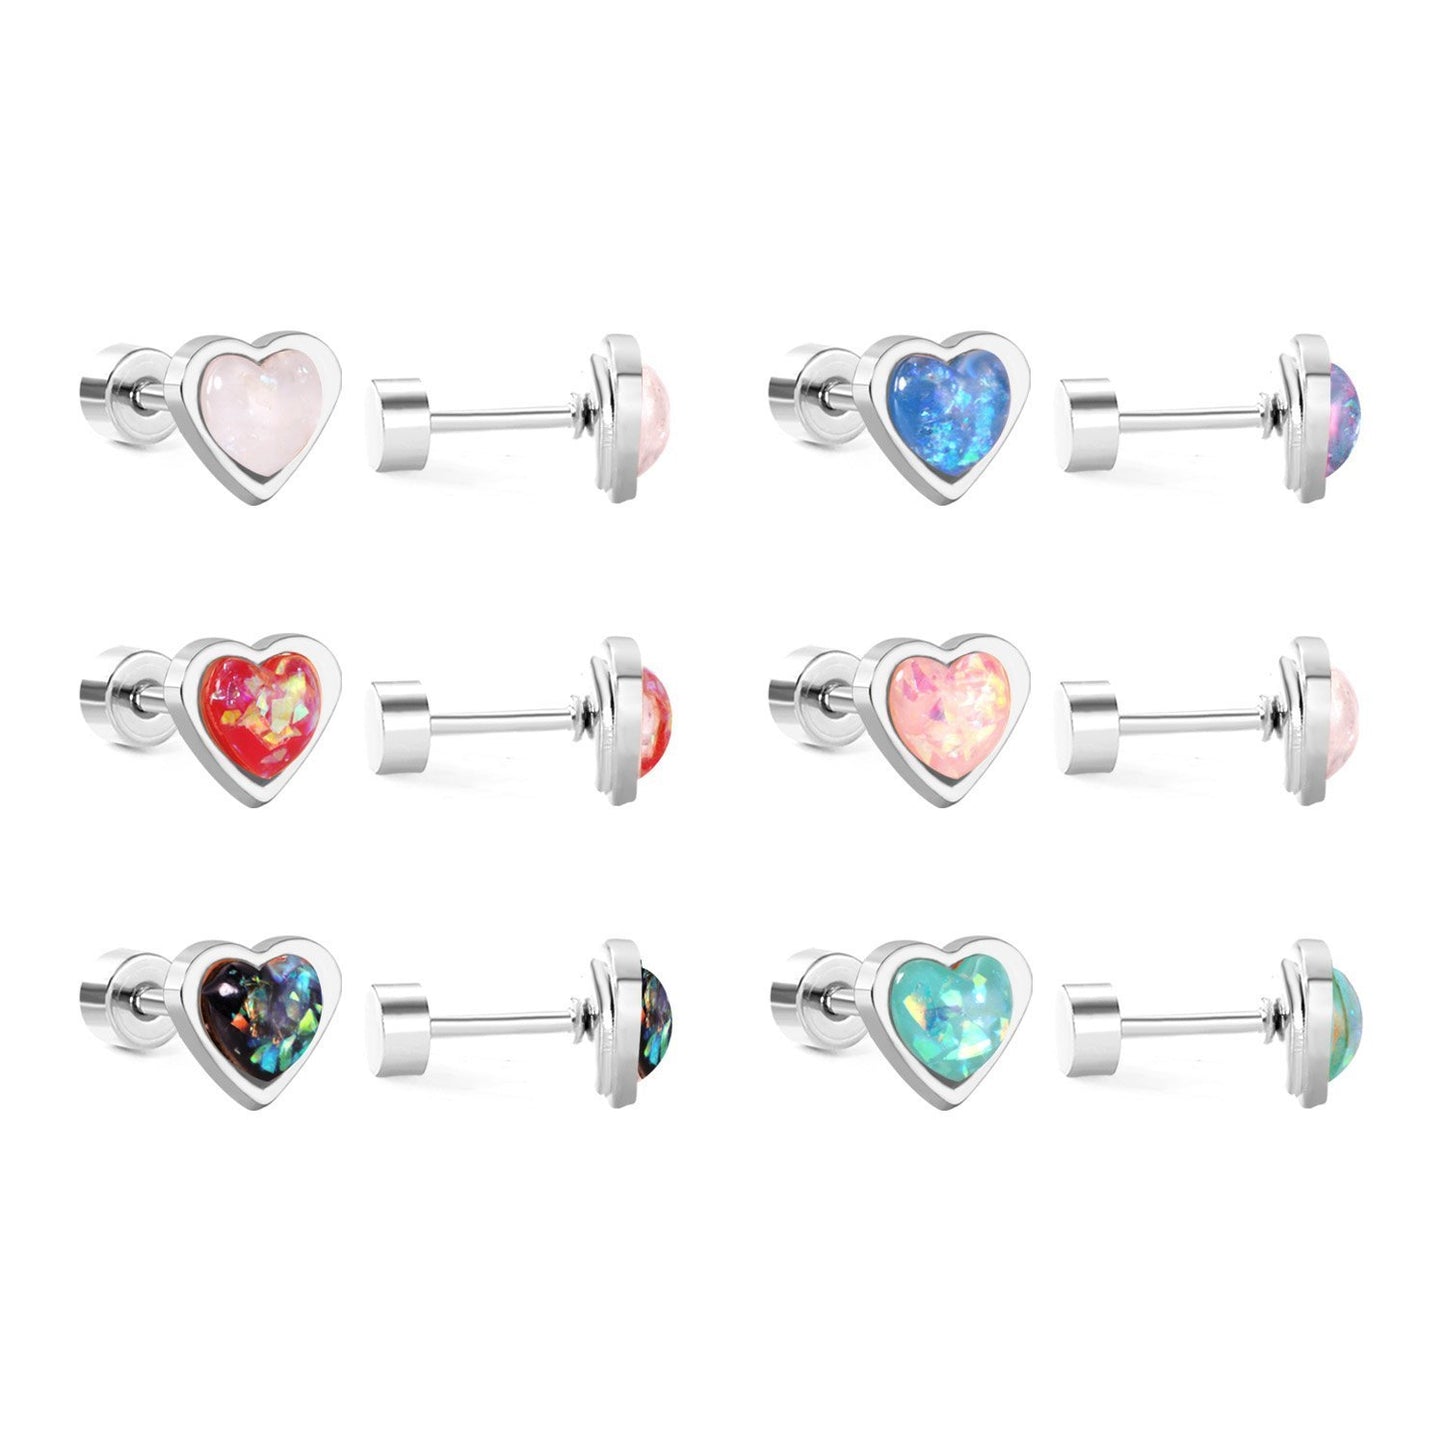 Children's, Teens' and Mothers' Earrings:  Surgical Steel, Gold IP, Sparkly Enamel Heart Earrings with Screw Backs - Aqua